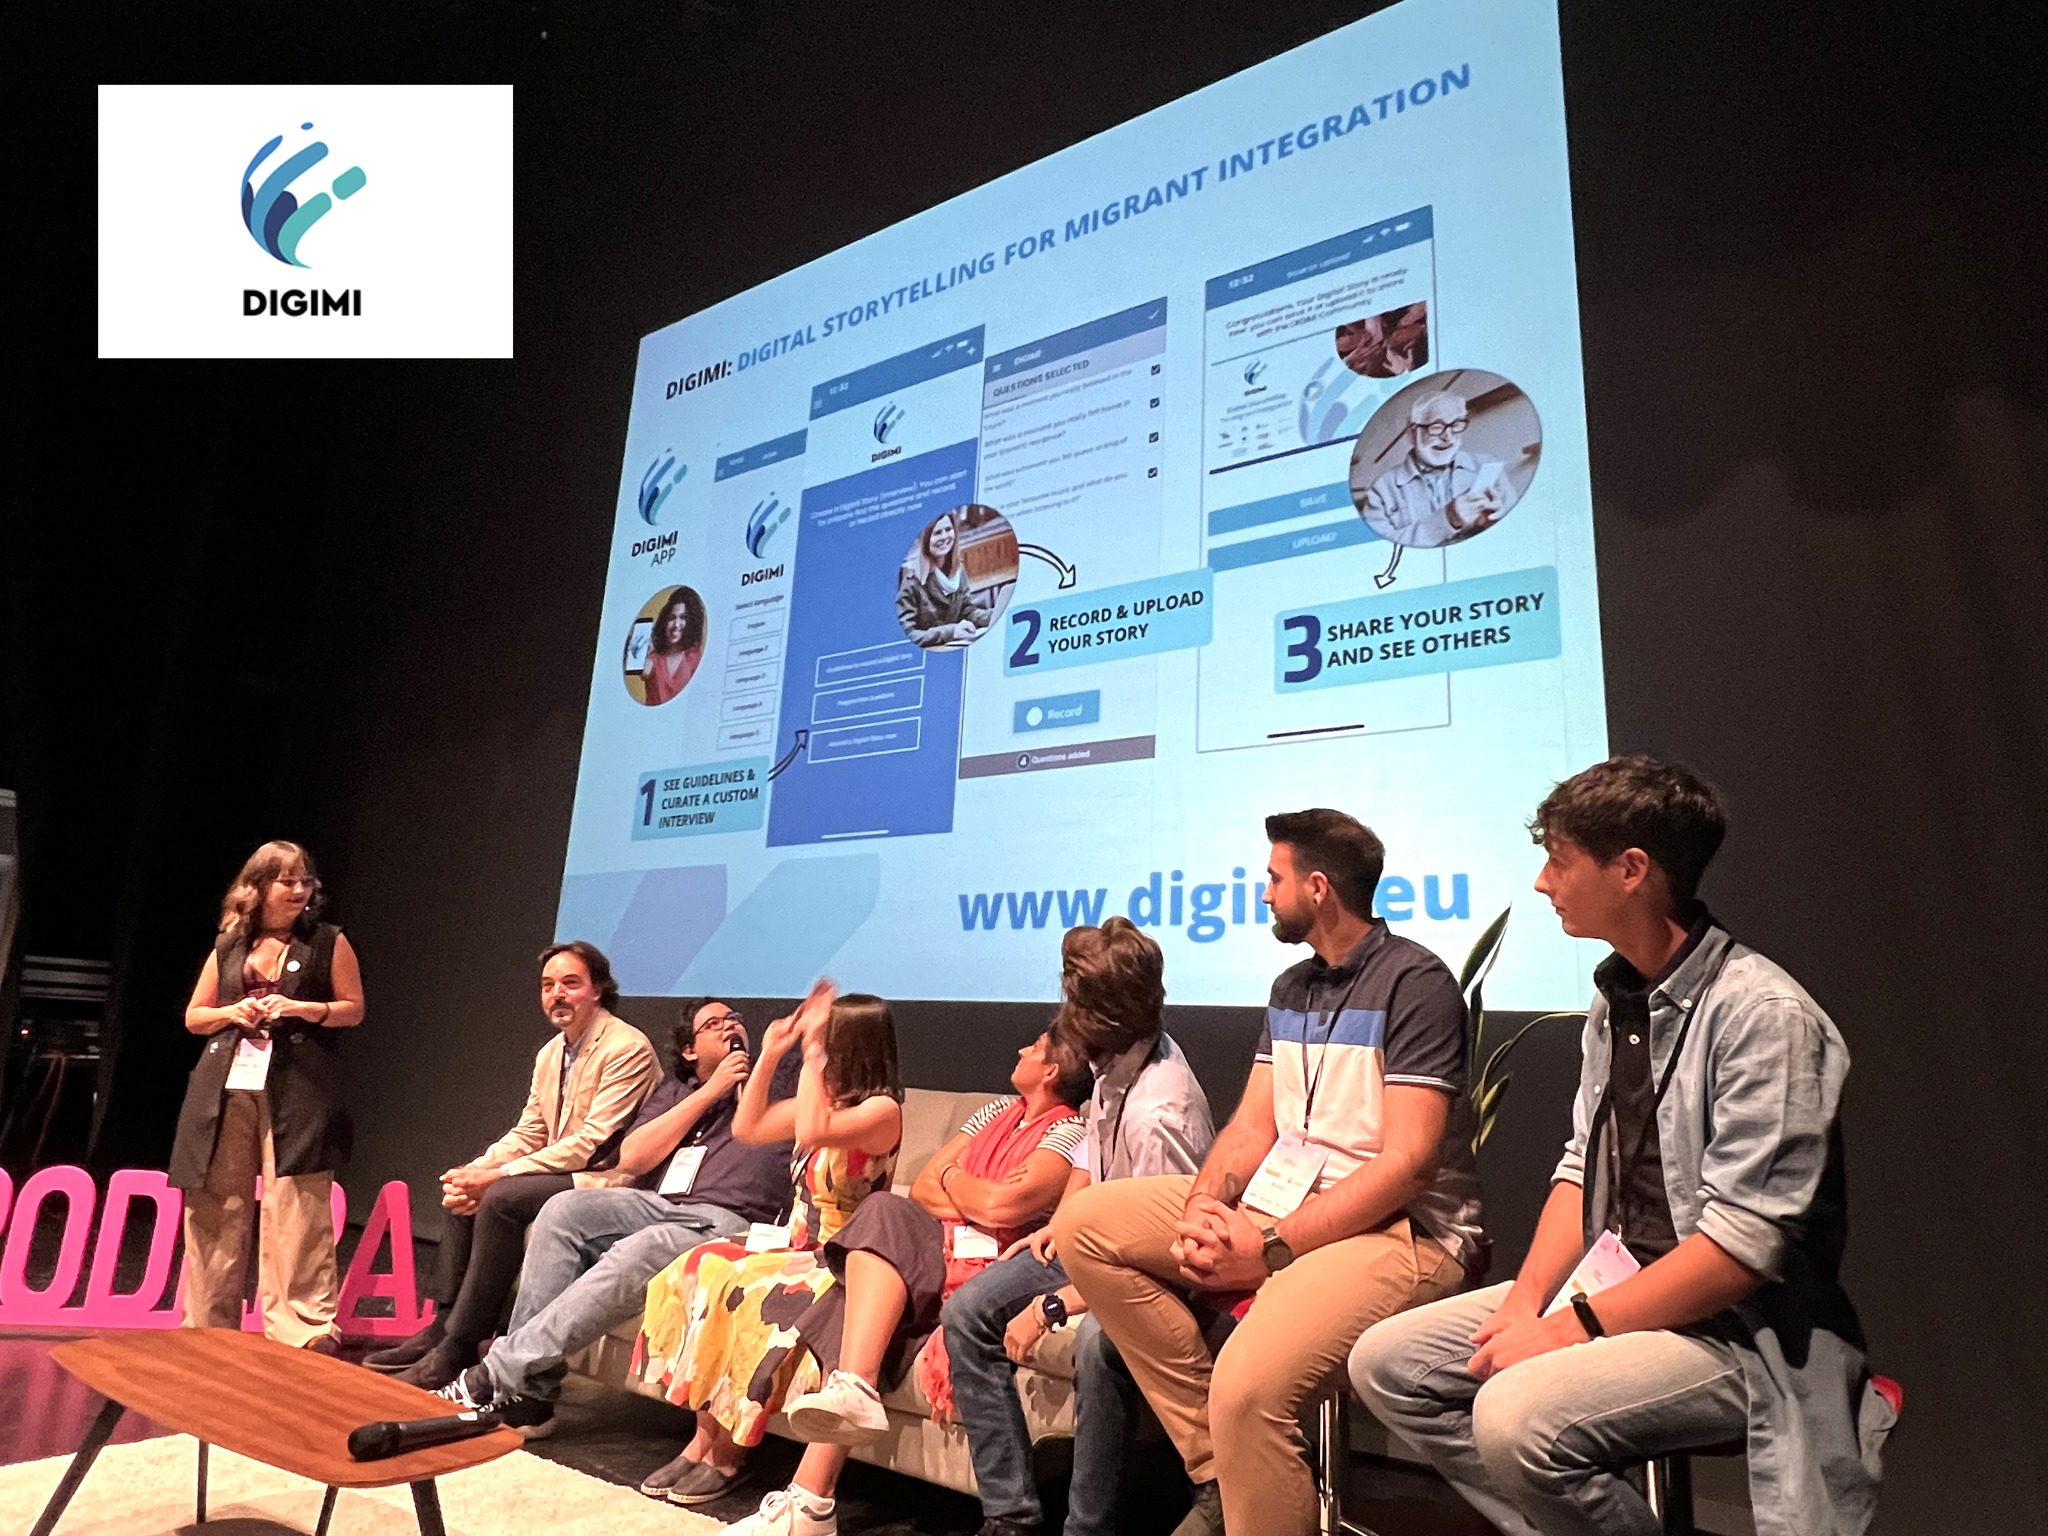 The Digimi app was introduced in Málaga at the event #EmpoderaLIVE